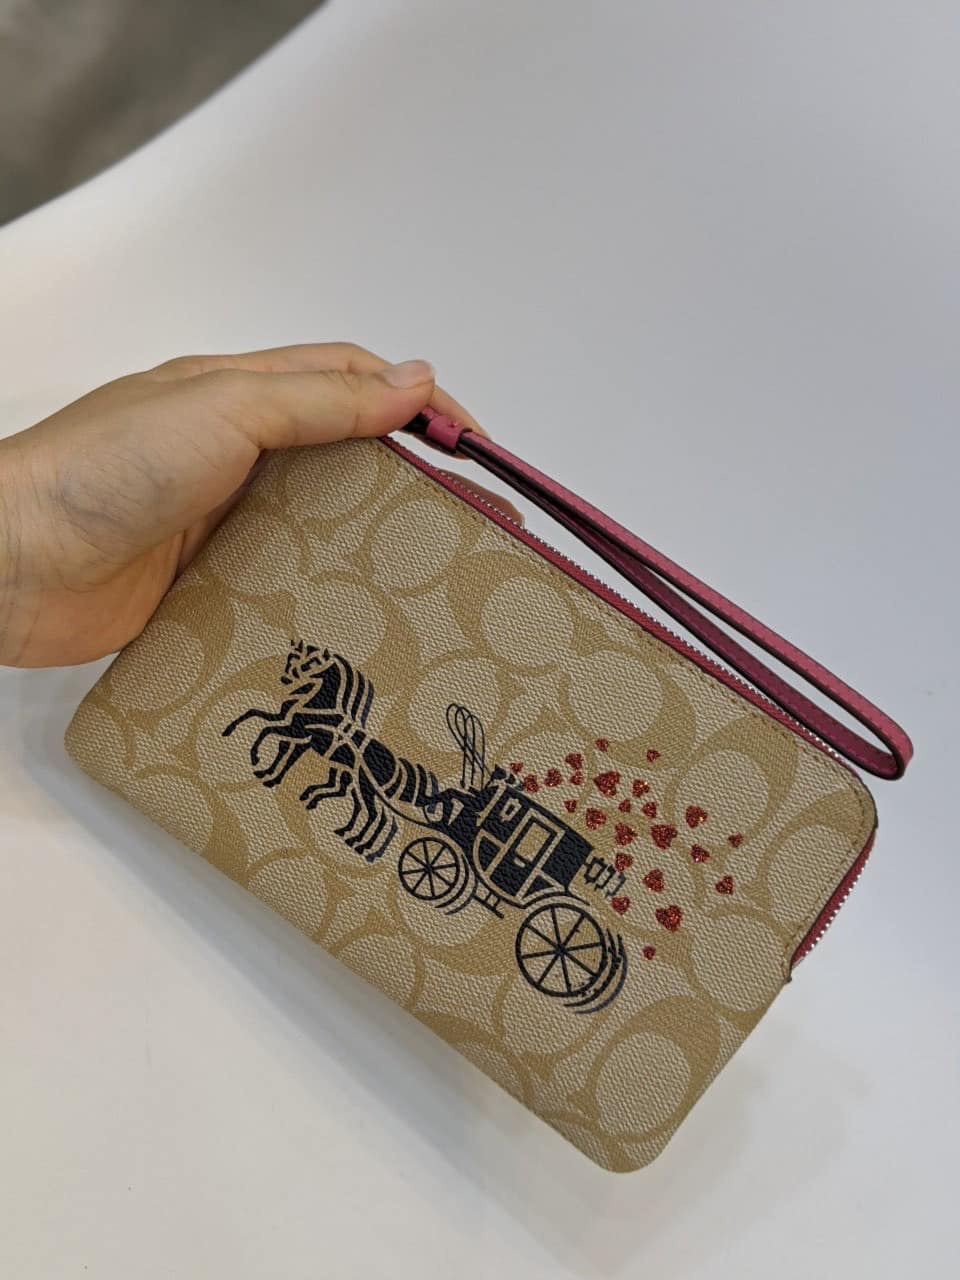 VÍ COACH MỎNG HỌA TIẾT XE NGỰA | CLUTCH COACH CORNER ZIP WRISTLET IN SIGNATURE CANVAS WITH HORSE AND CARRIAGE HEARTS 29